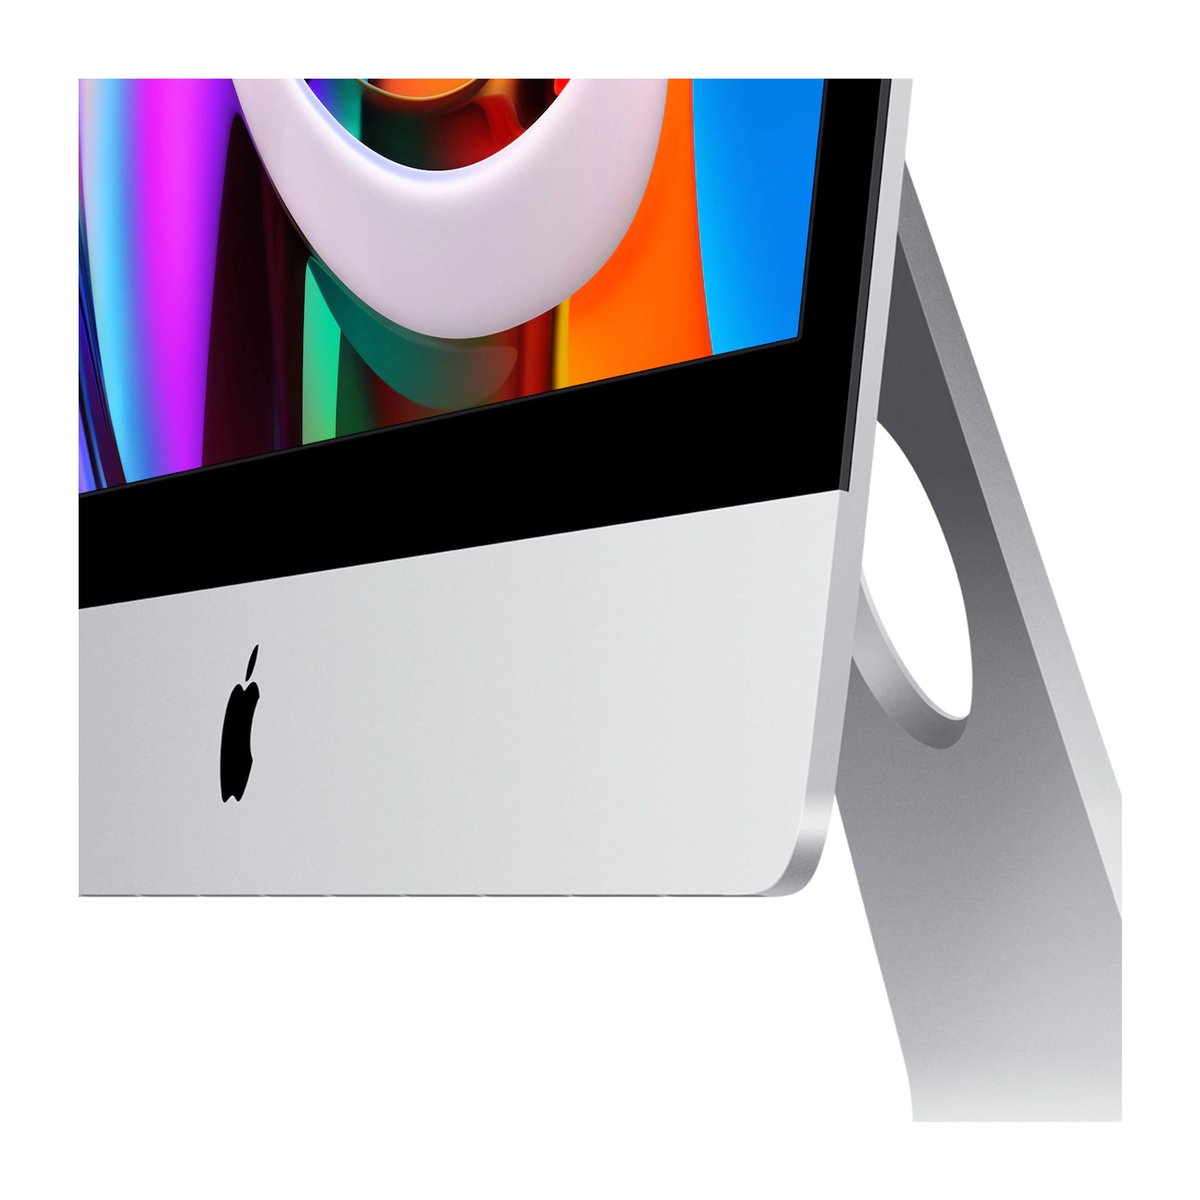 Apple iMac  The all-in-one for all (MXWU2AB/A)27 inch,3.3GHz 6-core 10th-generation Intel Core i5 processor,512 GB,8GBRAM,Silver